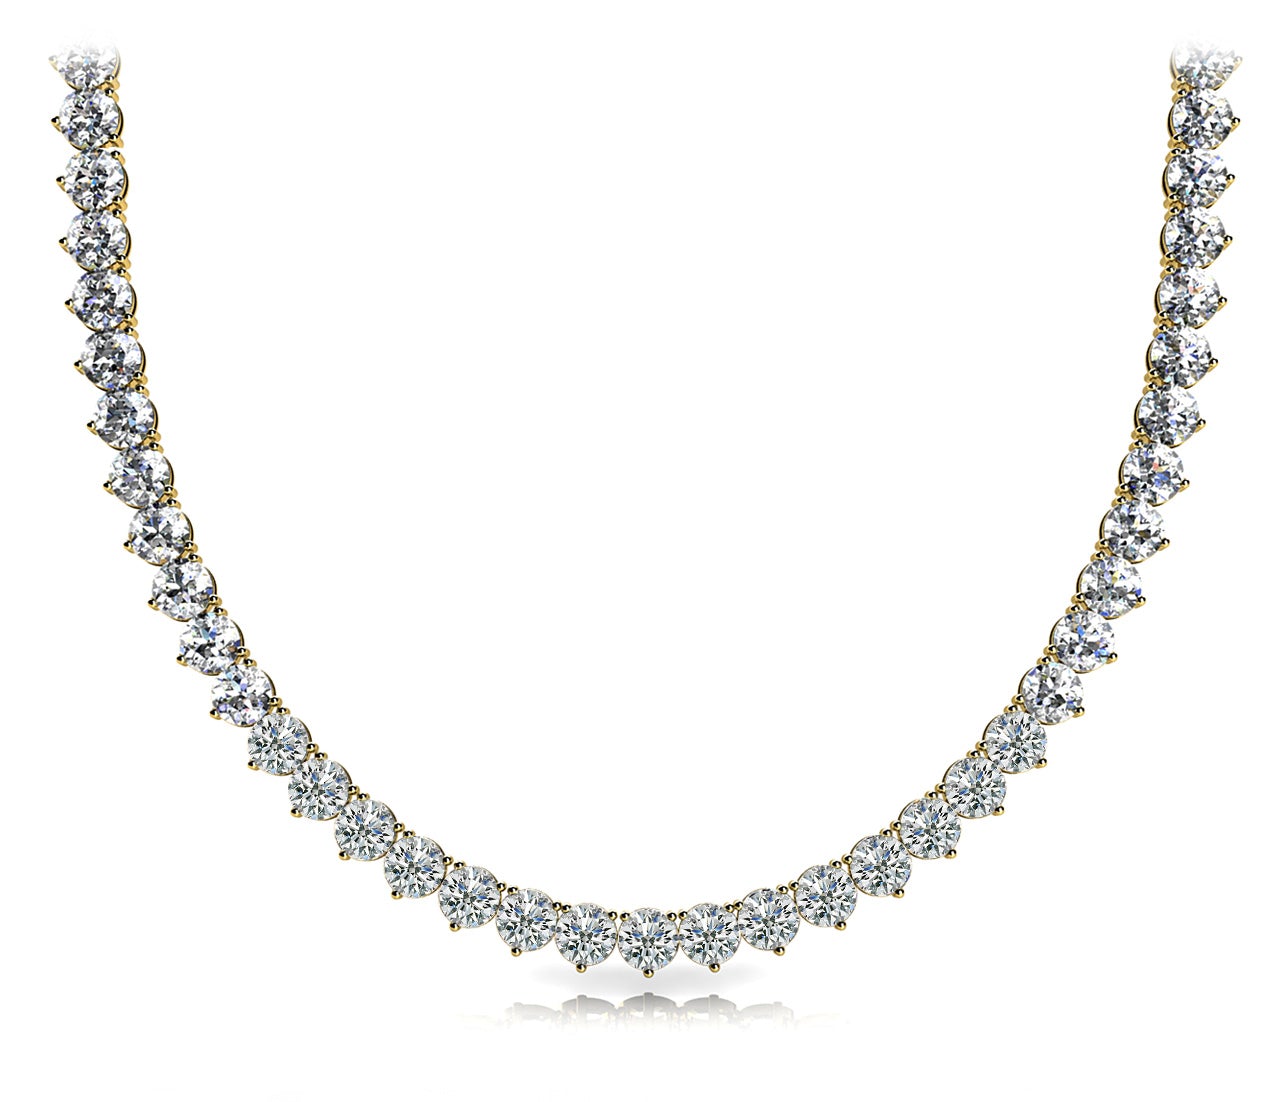 Diamond Rivera Necklace Round Shaped 19 Carat Necklace in 14K Yellow Gold Front View